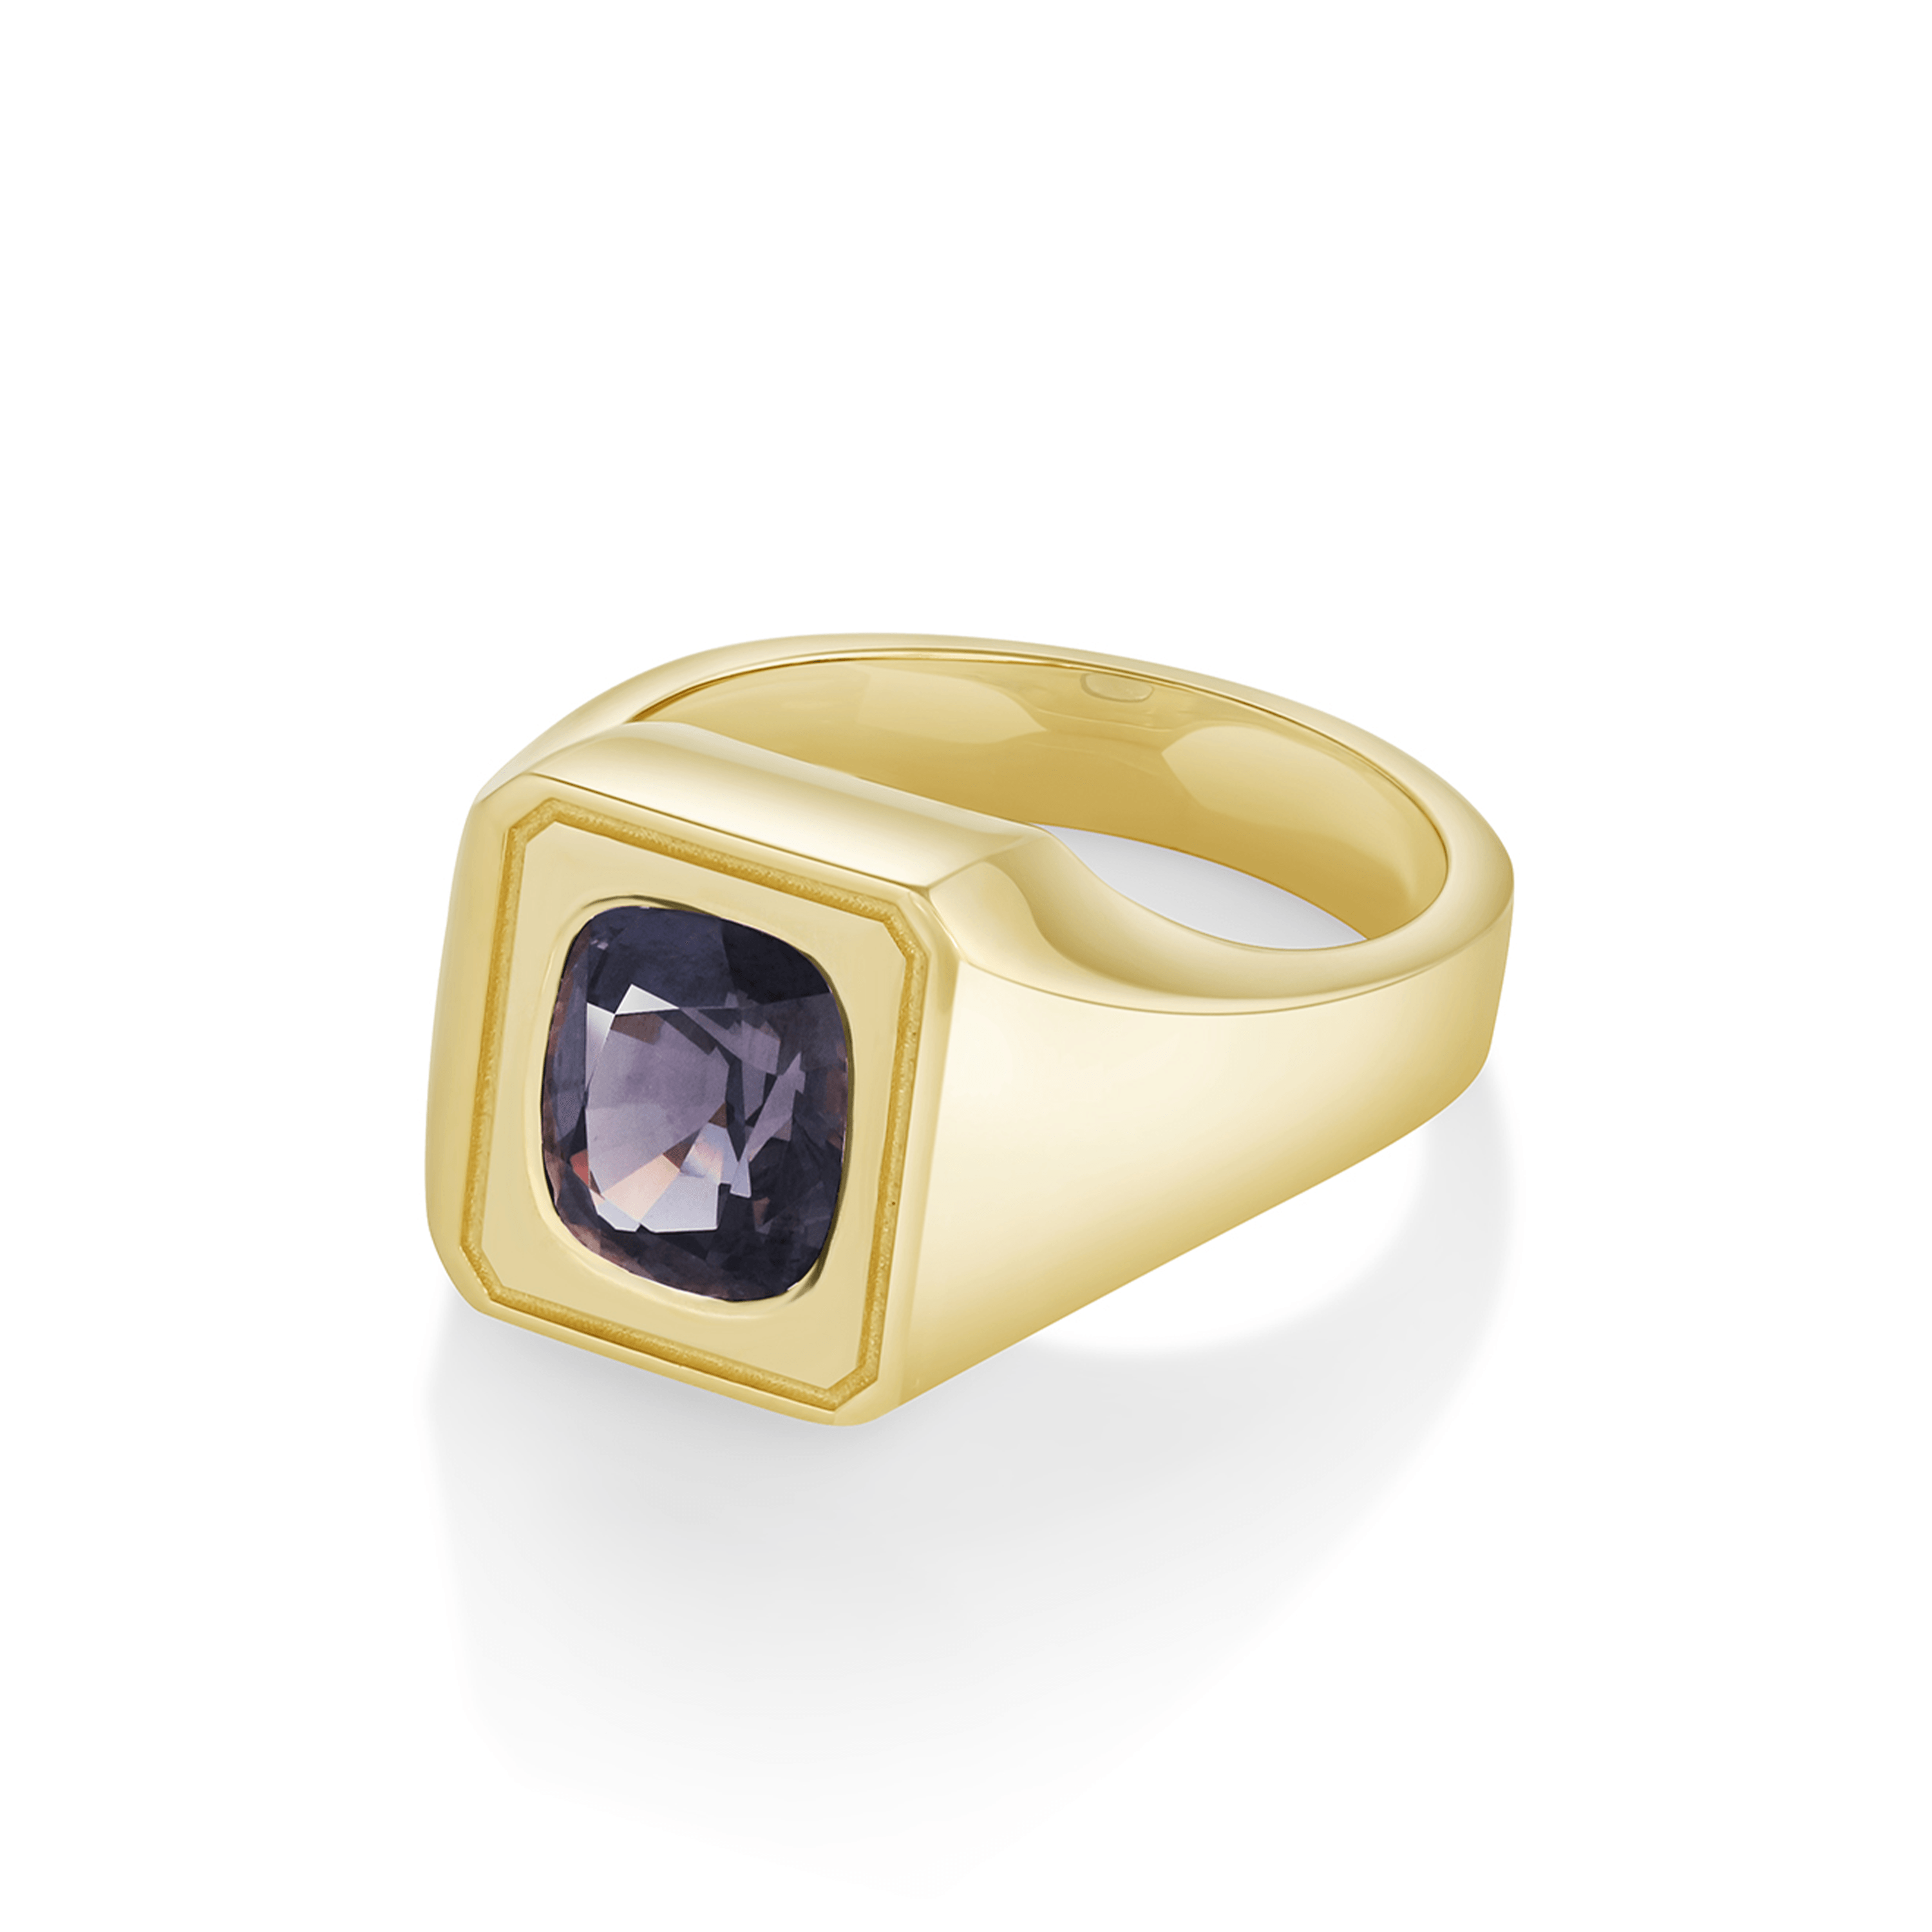 Marrow Fine Jewelry Men's Color Change Spinel Signet Ring